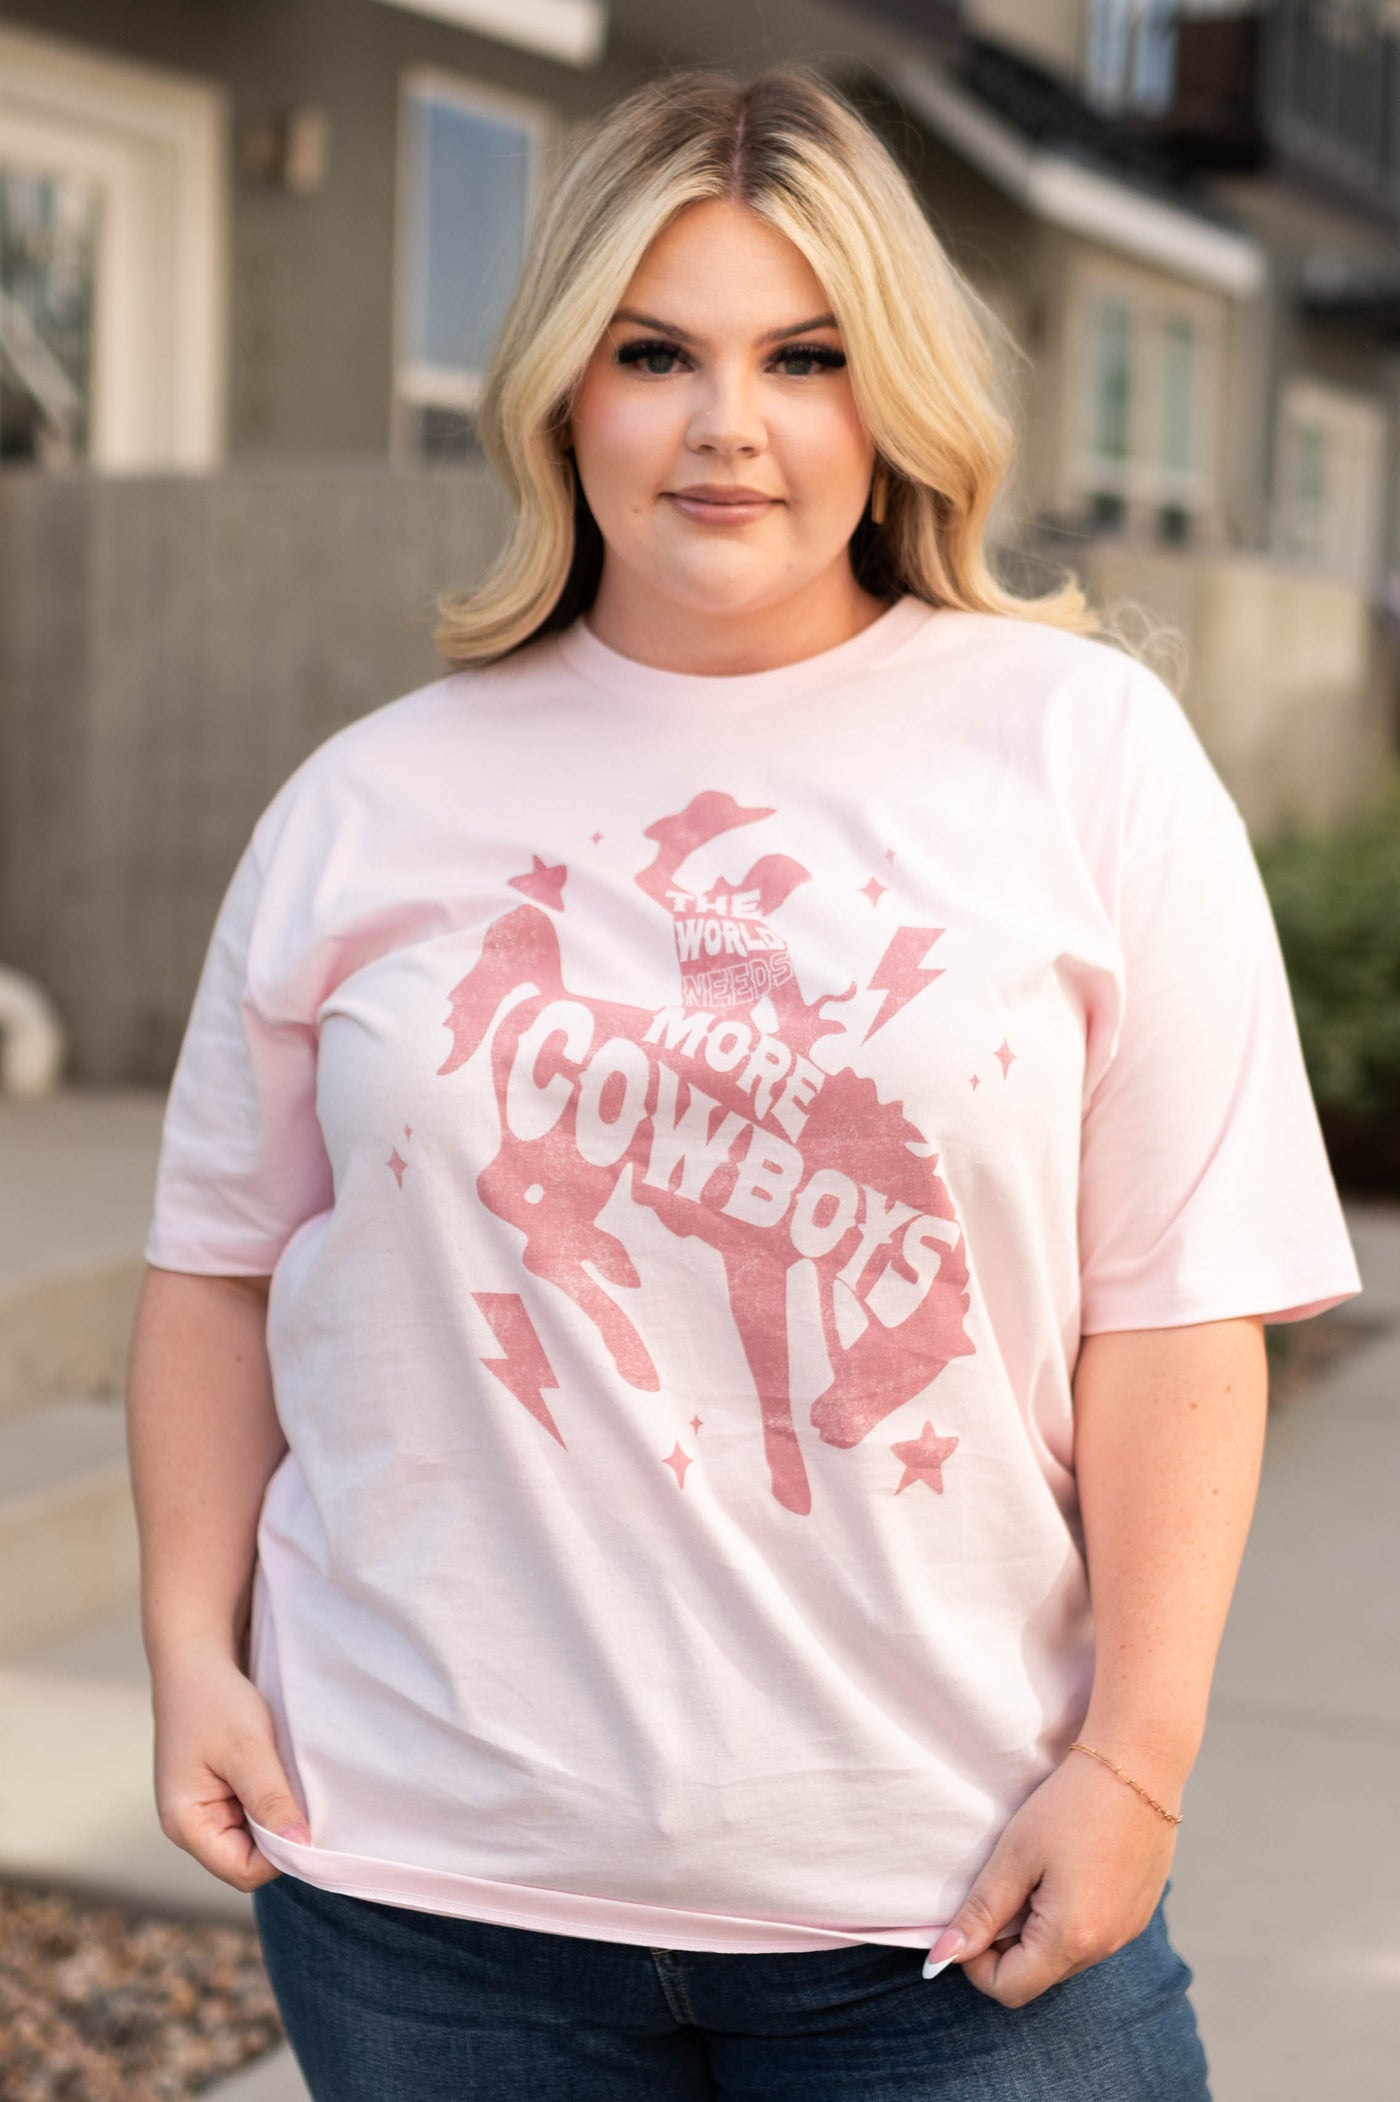 Plus size the world needs pink tee with short sleeves and a horse